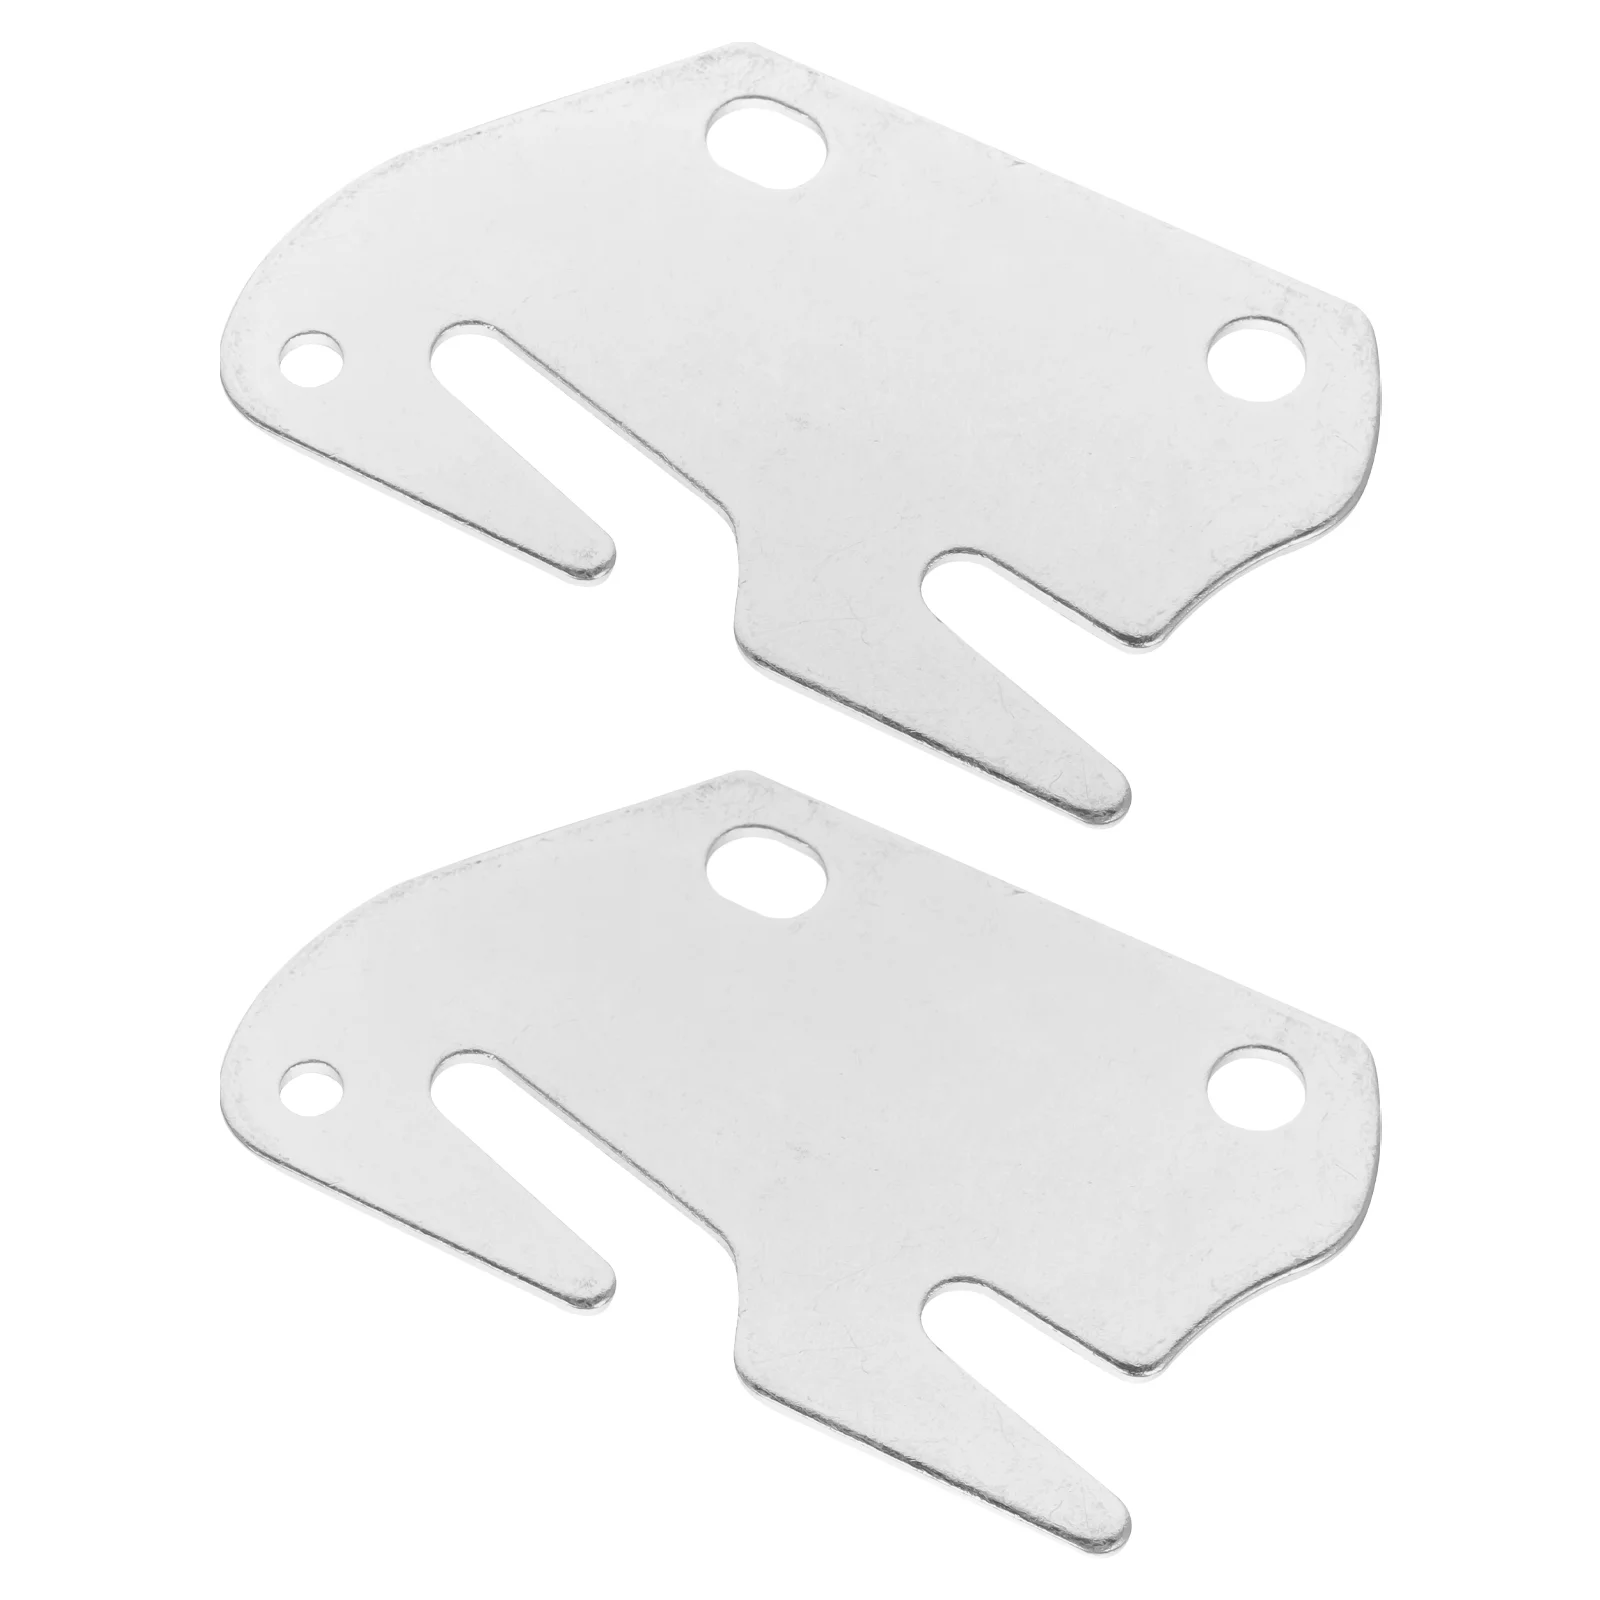 

Universal Wood Bed Rail Plates Bracket 2pcs Beds Frame Bracket Headboard Footboard Replacement Hook Parts Fitting